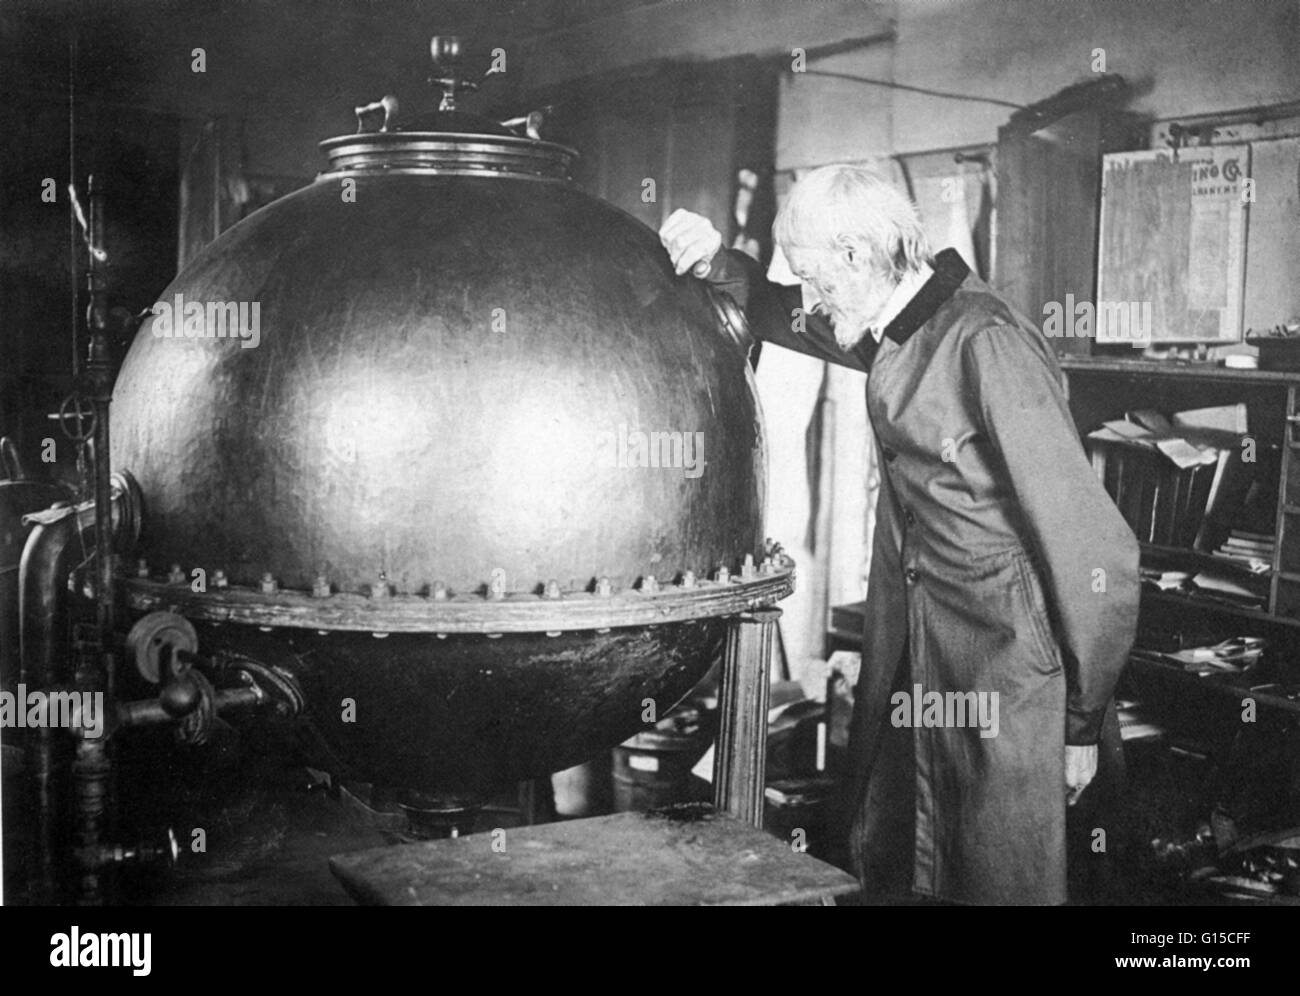 Alonzo Hollister, a member of the Society of Shakers, and his vacuum pan evaporator. This invention was used to distill herbs in a vacuum at very low temperatures, thereby preserving their medicinal qualities. It was this machine that inspired Gail Borden Stock Photo